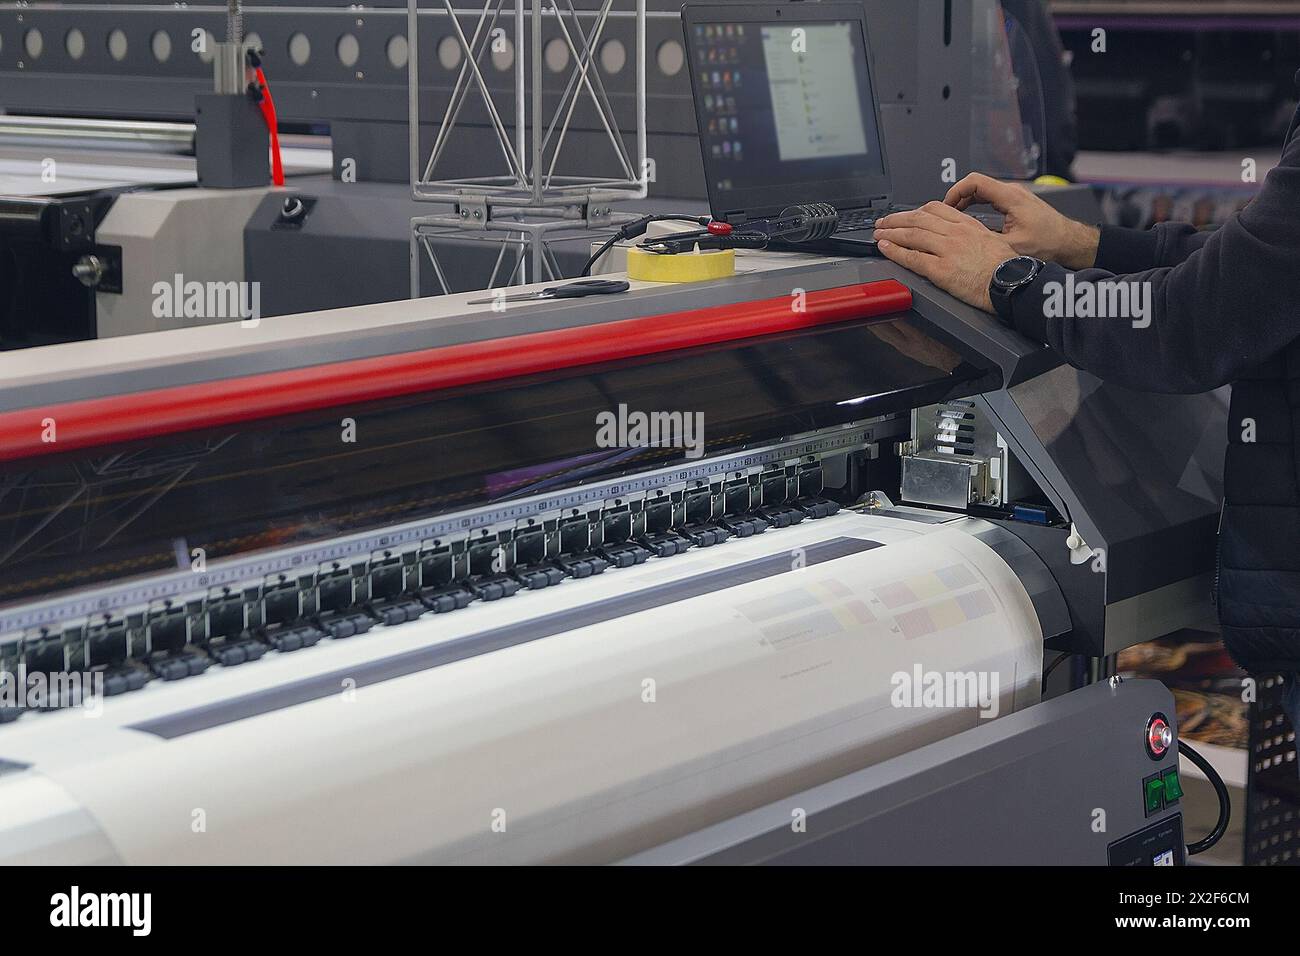 A man adjusts the printing process on a large format printing machine. Industry Stock Photo